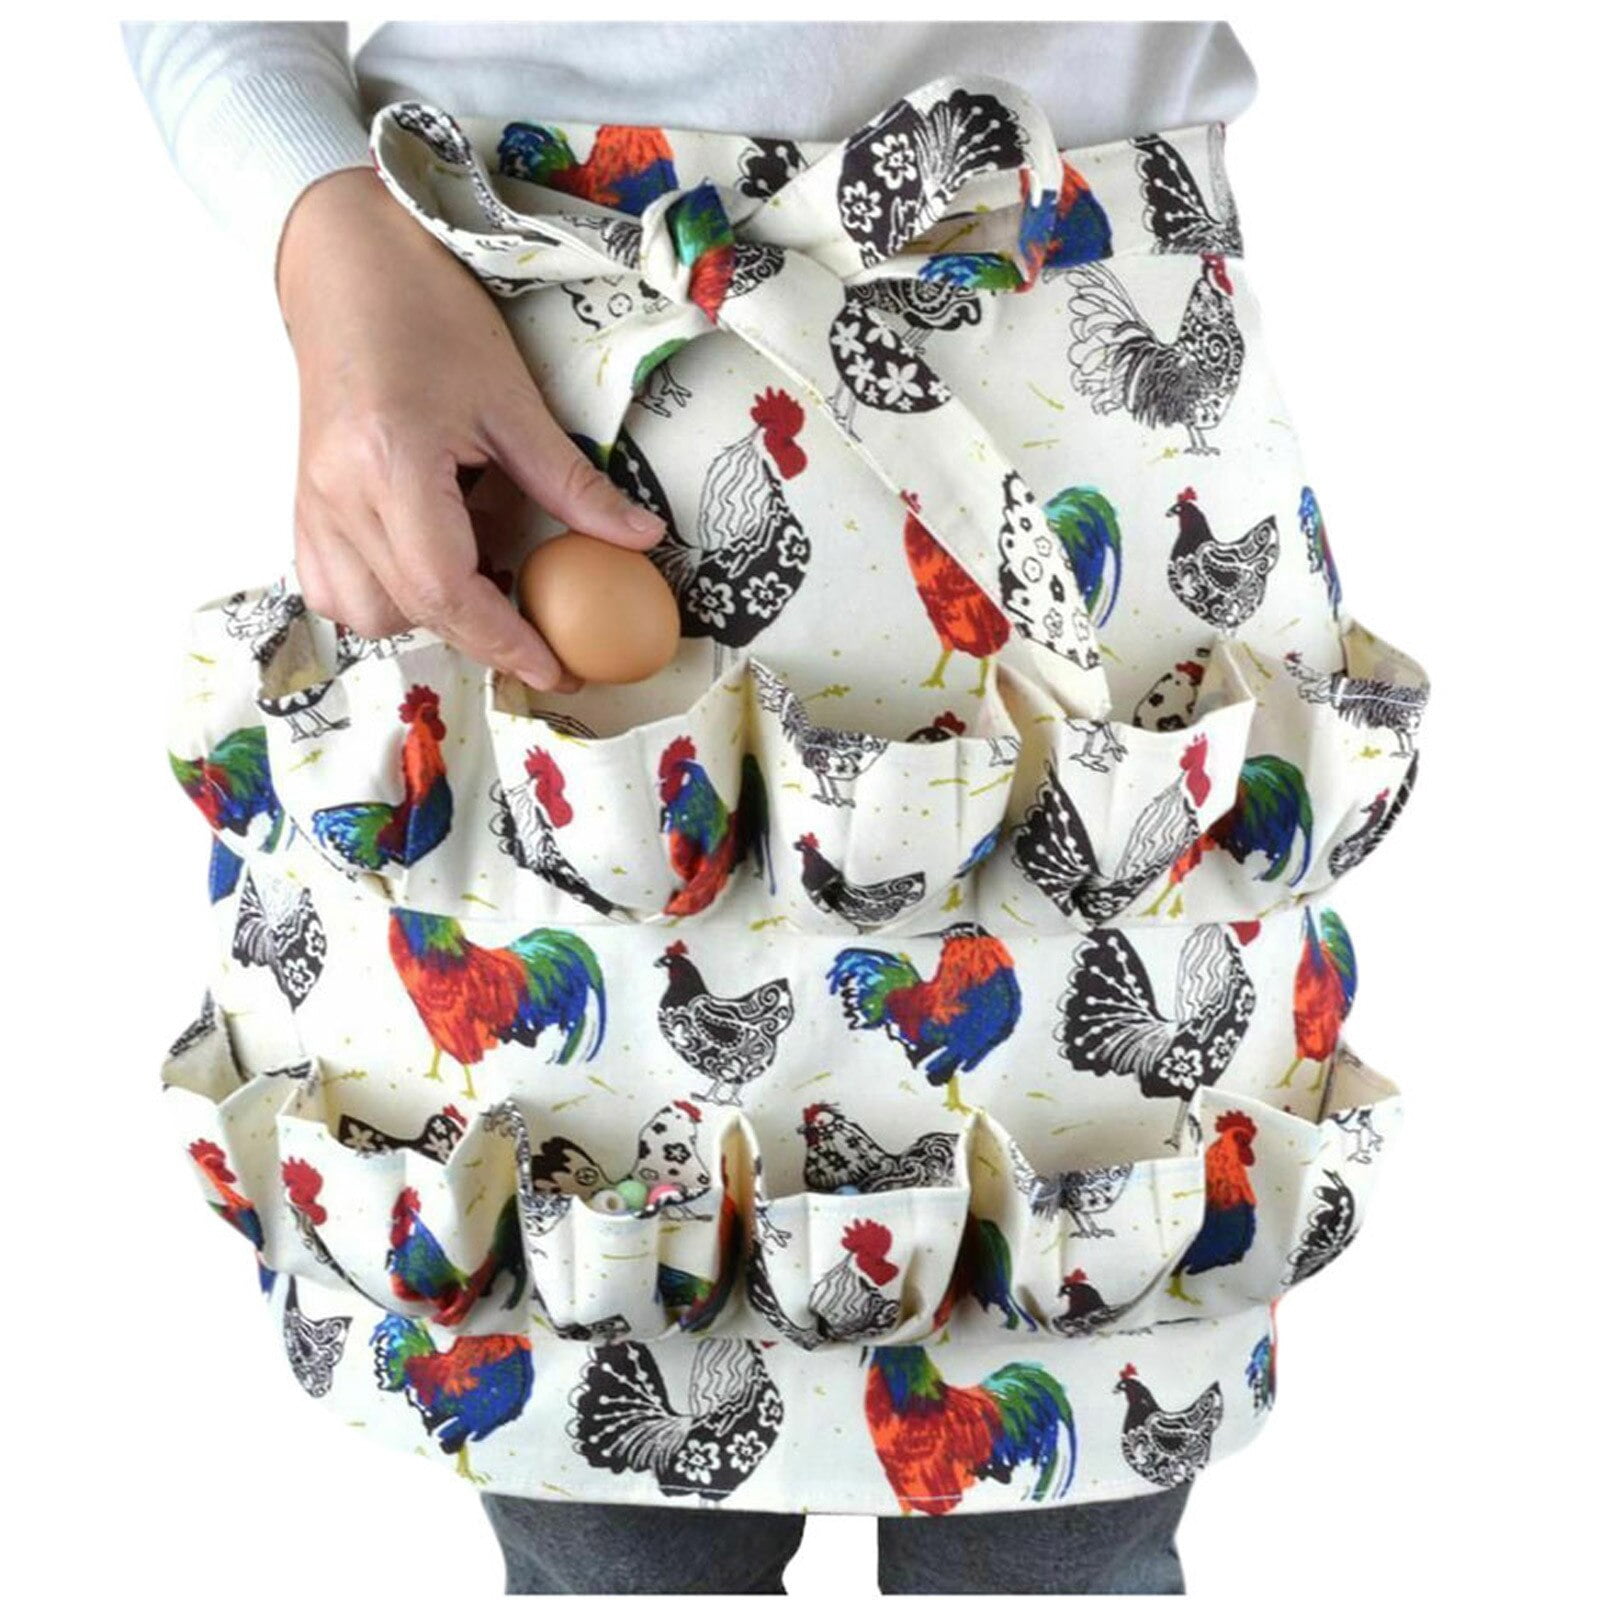 Chicken Egg Apron Gathering Egg Apron with Pockets for 12 – Egg